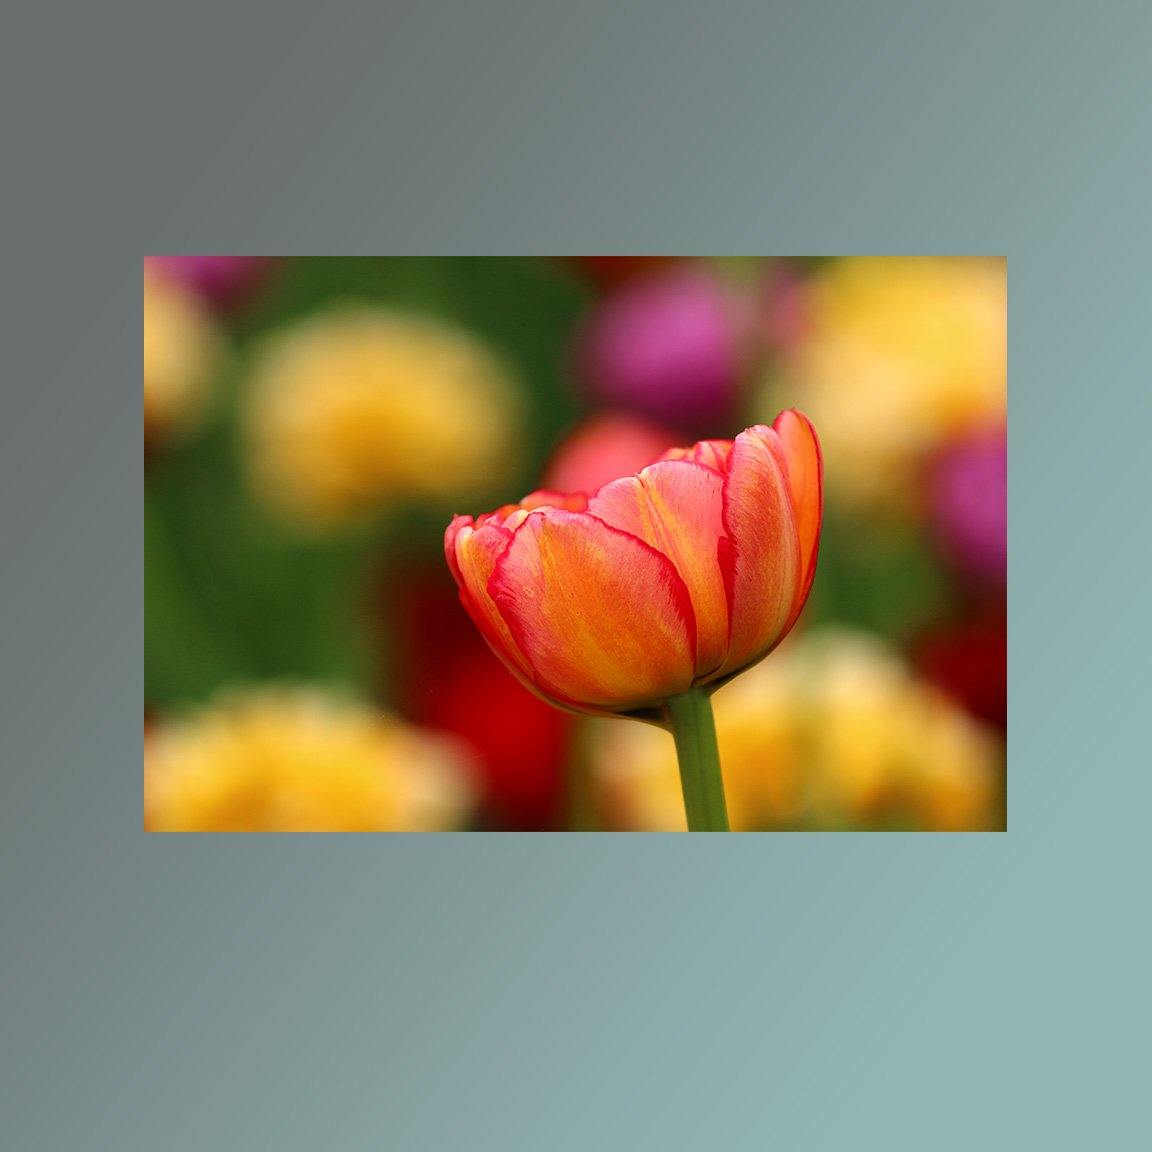 Solo Pink and Yellow Tulip Image - Andrew Moor Photography